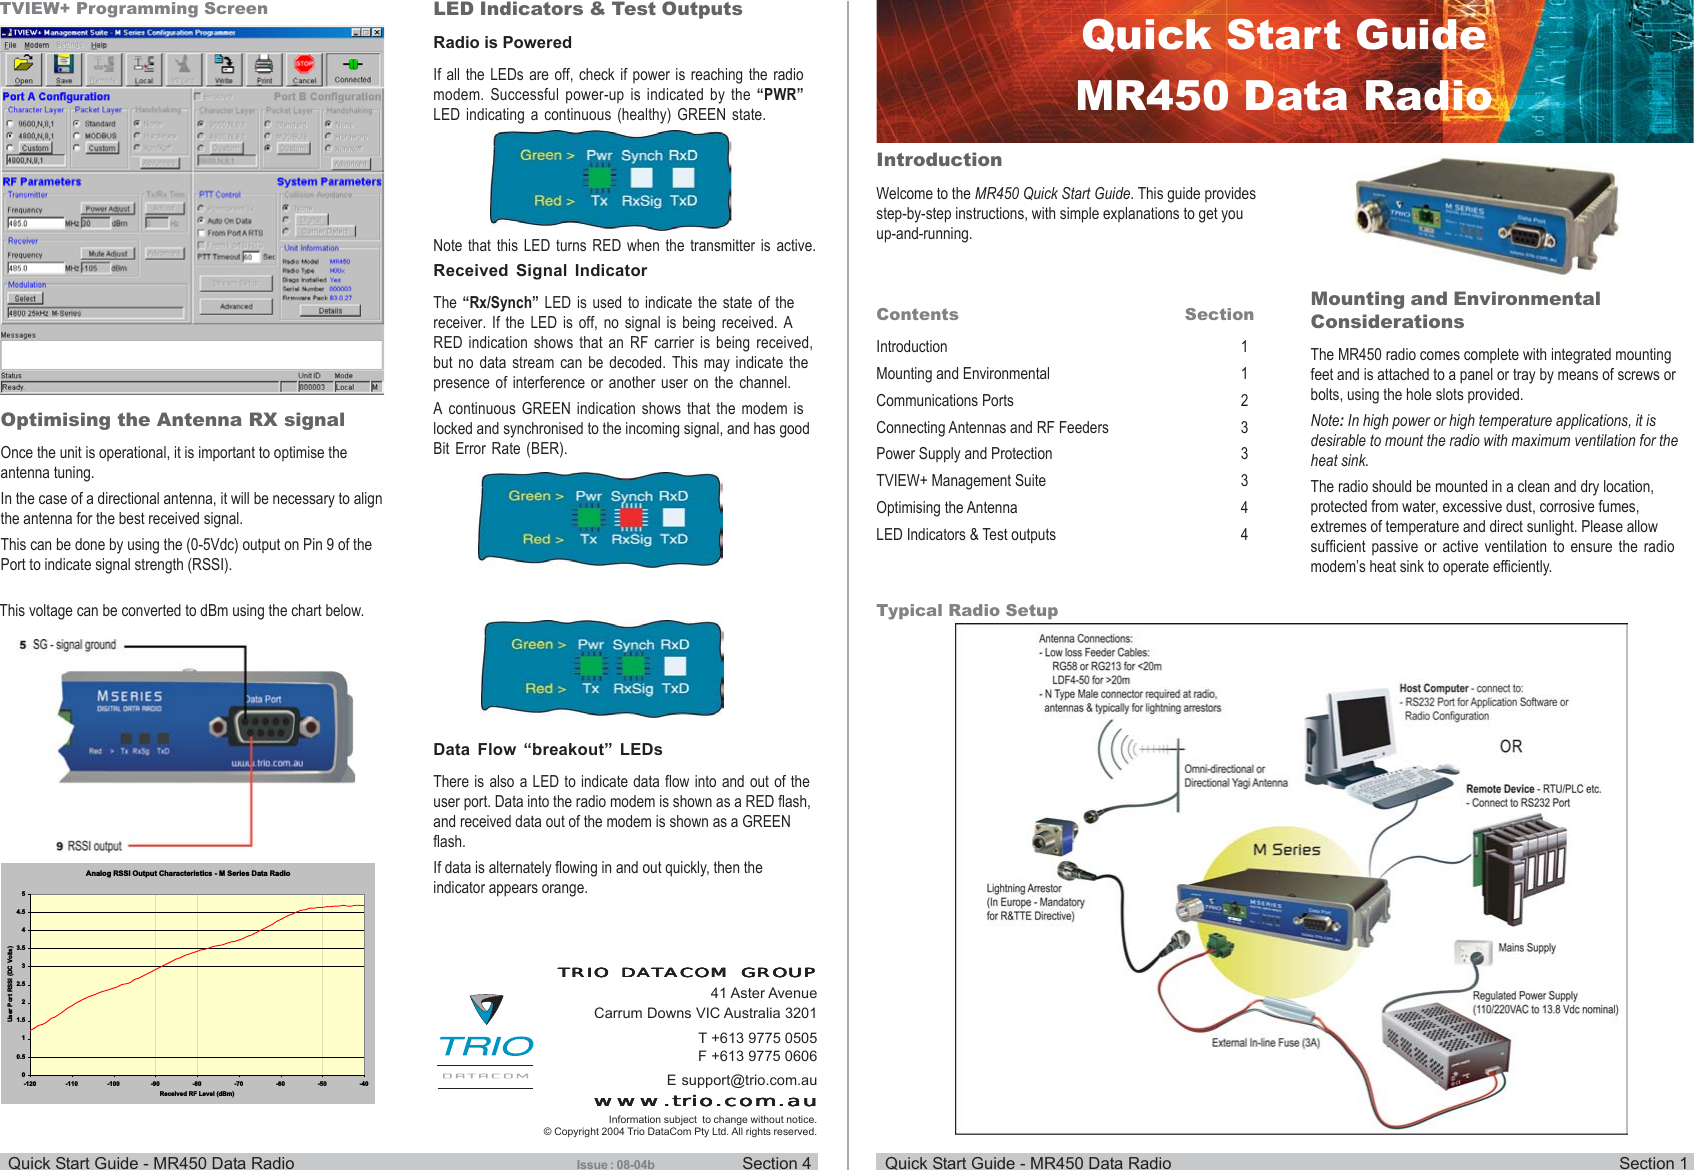 Quick Start Guide - MR450 Data Radio Section 1Quick Start Guide - MR450 Data Radio Section 4IntroductionWelcome to the MR450 Quick Start Guide. This guide providesstep-by-step instructions, with simple explanations to get youup-and-running.Contents SectionIntroduction 1Mounting and Environmental 1Communications Ports 2Connecting Antennas and RF Feeders 3Power Supply and Protection 3TVIEW+ Management Suite 3Optimising the Antenna 4LED Indicators &amp; Test outputs 4Mounting and EnvironmentalConsiderationsThe MR450 radio comes complete with integrated mountingfeet and is attached to a panel or tray by means of screws orbolts, using the hole slots provided.Note: In high power or high temperature applications, it isdesirable to mount the radio with maximum ventilation for theheat sink.The radio should be mounted in a clean and dry location,protected from water, excessive dust, corrosive fumes,extremes of temperature and direct sunlight. Please allowsufficient passive or active ventilation to ensure the radiomodem’s heat sink to operate efficiently.Quick Start GuideMR450 Data RadioTypical Radio SetupOptimising the Antenna RX signalOnce the unit is operational, it is important to optimise theantenna tuning.In the case of a directional antenna, it will be necessary to alignthe antenna for the best received signal.This can be done by using the (0-5Vdc) output on Pin 9 of thePort to indicate signal strength (RSSI).TVIEW+ Programming Screen LED Indicators &amp; Test OutputsRadio is PoweredIf all the LEDs are off, check if power is reaching the radiomodem. Successful power-up is indicated by the “PWR”LED indicating a continuous (healthy) GREEN state.Received Signal IndicatorThe “Rx/Synch” LED is used to indicate the state of thereceiver. If the LED is off, no signal is being received. ARED indication shows that an RF carrier is being received,but no data stream can be decoded. This may indicate thepresence of interference or another user on the channel.A continuous GREEN indication shows that the modem islocked and synchronised to the incoming signal, and has goodBit Error Rate (BER).Analog RSSI Output Characteristics - M Series Data Radio00.511.522.533.544.55-120 -110 -100 -90 -80 -70 -60 -50 -40Received RF Level (dBm)User Port RSSl (DC Volts)T +613 9775 0505F +613 9775 0606E support@trio.com.auwww.trio.com.auwww.trio.com.auwww.trio.com.auwww.trio.com.auwww.trio.com.auTRIO DATRIO DATRIO DATRIO DATRIO DATTTTTACOM GROUPACOM GROUPACOM GROUPACOM GROUPACOM GROUP41 Aster AvenueCarrum Downs VIC Australia 3201Information subject  to change without notice.© Copyright 2004 Trio DataCom Pty Ltd. All rights reserved.Data Flow “breakout” LEDsThere is also a LED to indicate data flow into and out of theuser port. Data into the radio modem is shown as a RED flash,and received data out of the modem is shown as a GREENflash.If data is alternately flowing in and out quickly, then theindicator appears orange.Issue : 08-04bThis voltage can be converted to dBm using the chart below.Note that this LED turns RED when the transmitter is active.